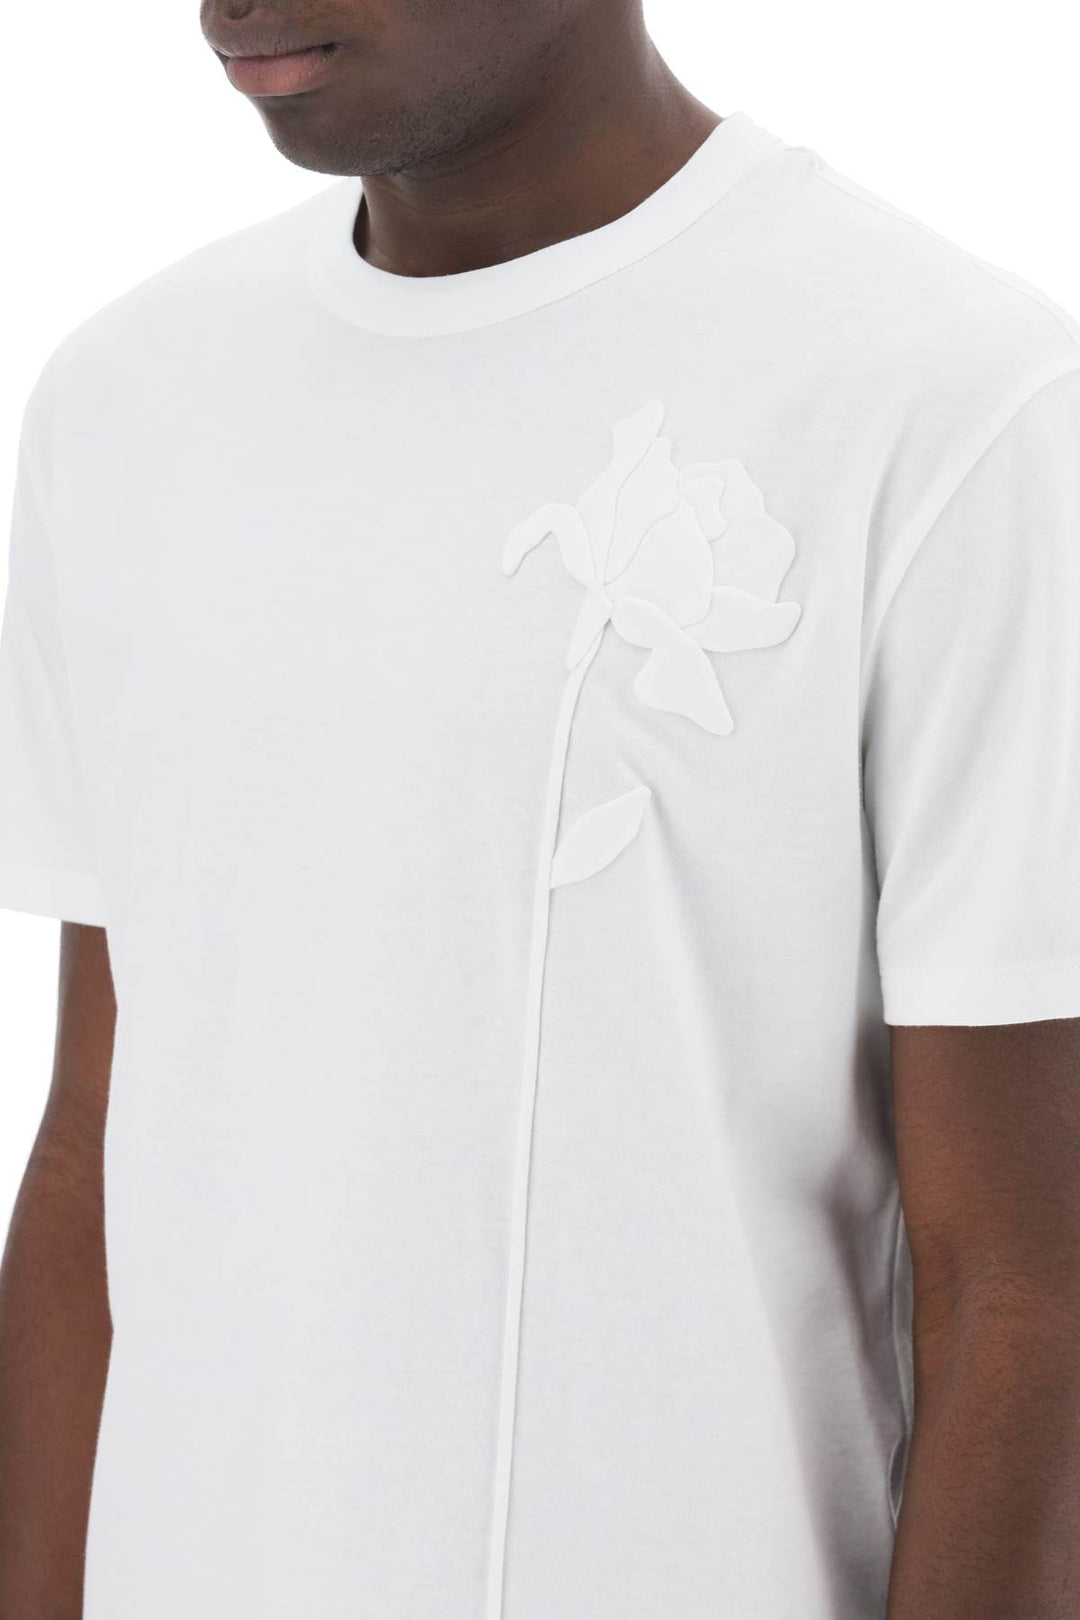 Valentino Garavani Replace With Double Quoteflower Embroidered T Shirt   White